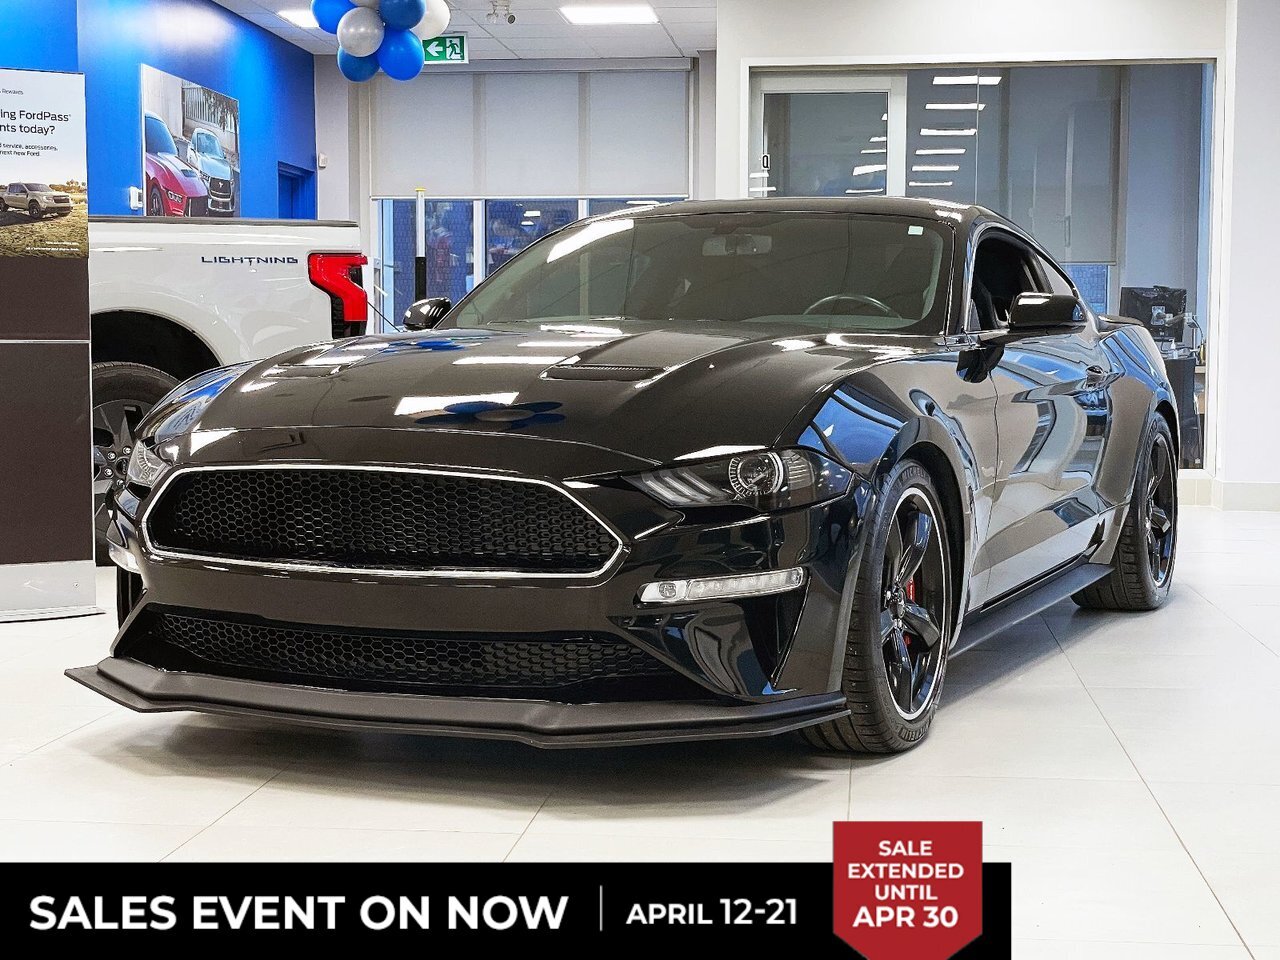 2020 Ford Mustang Coupe GT Bullitt Manual Trans. | 480 HP | Leather 